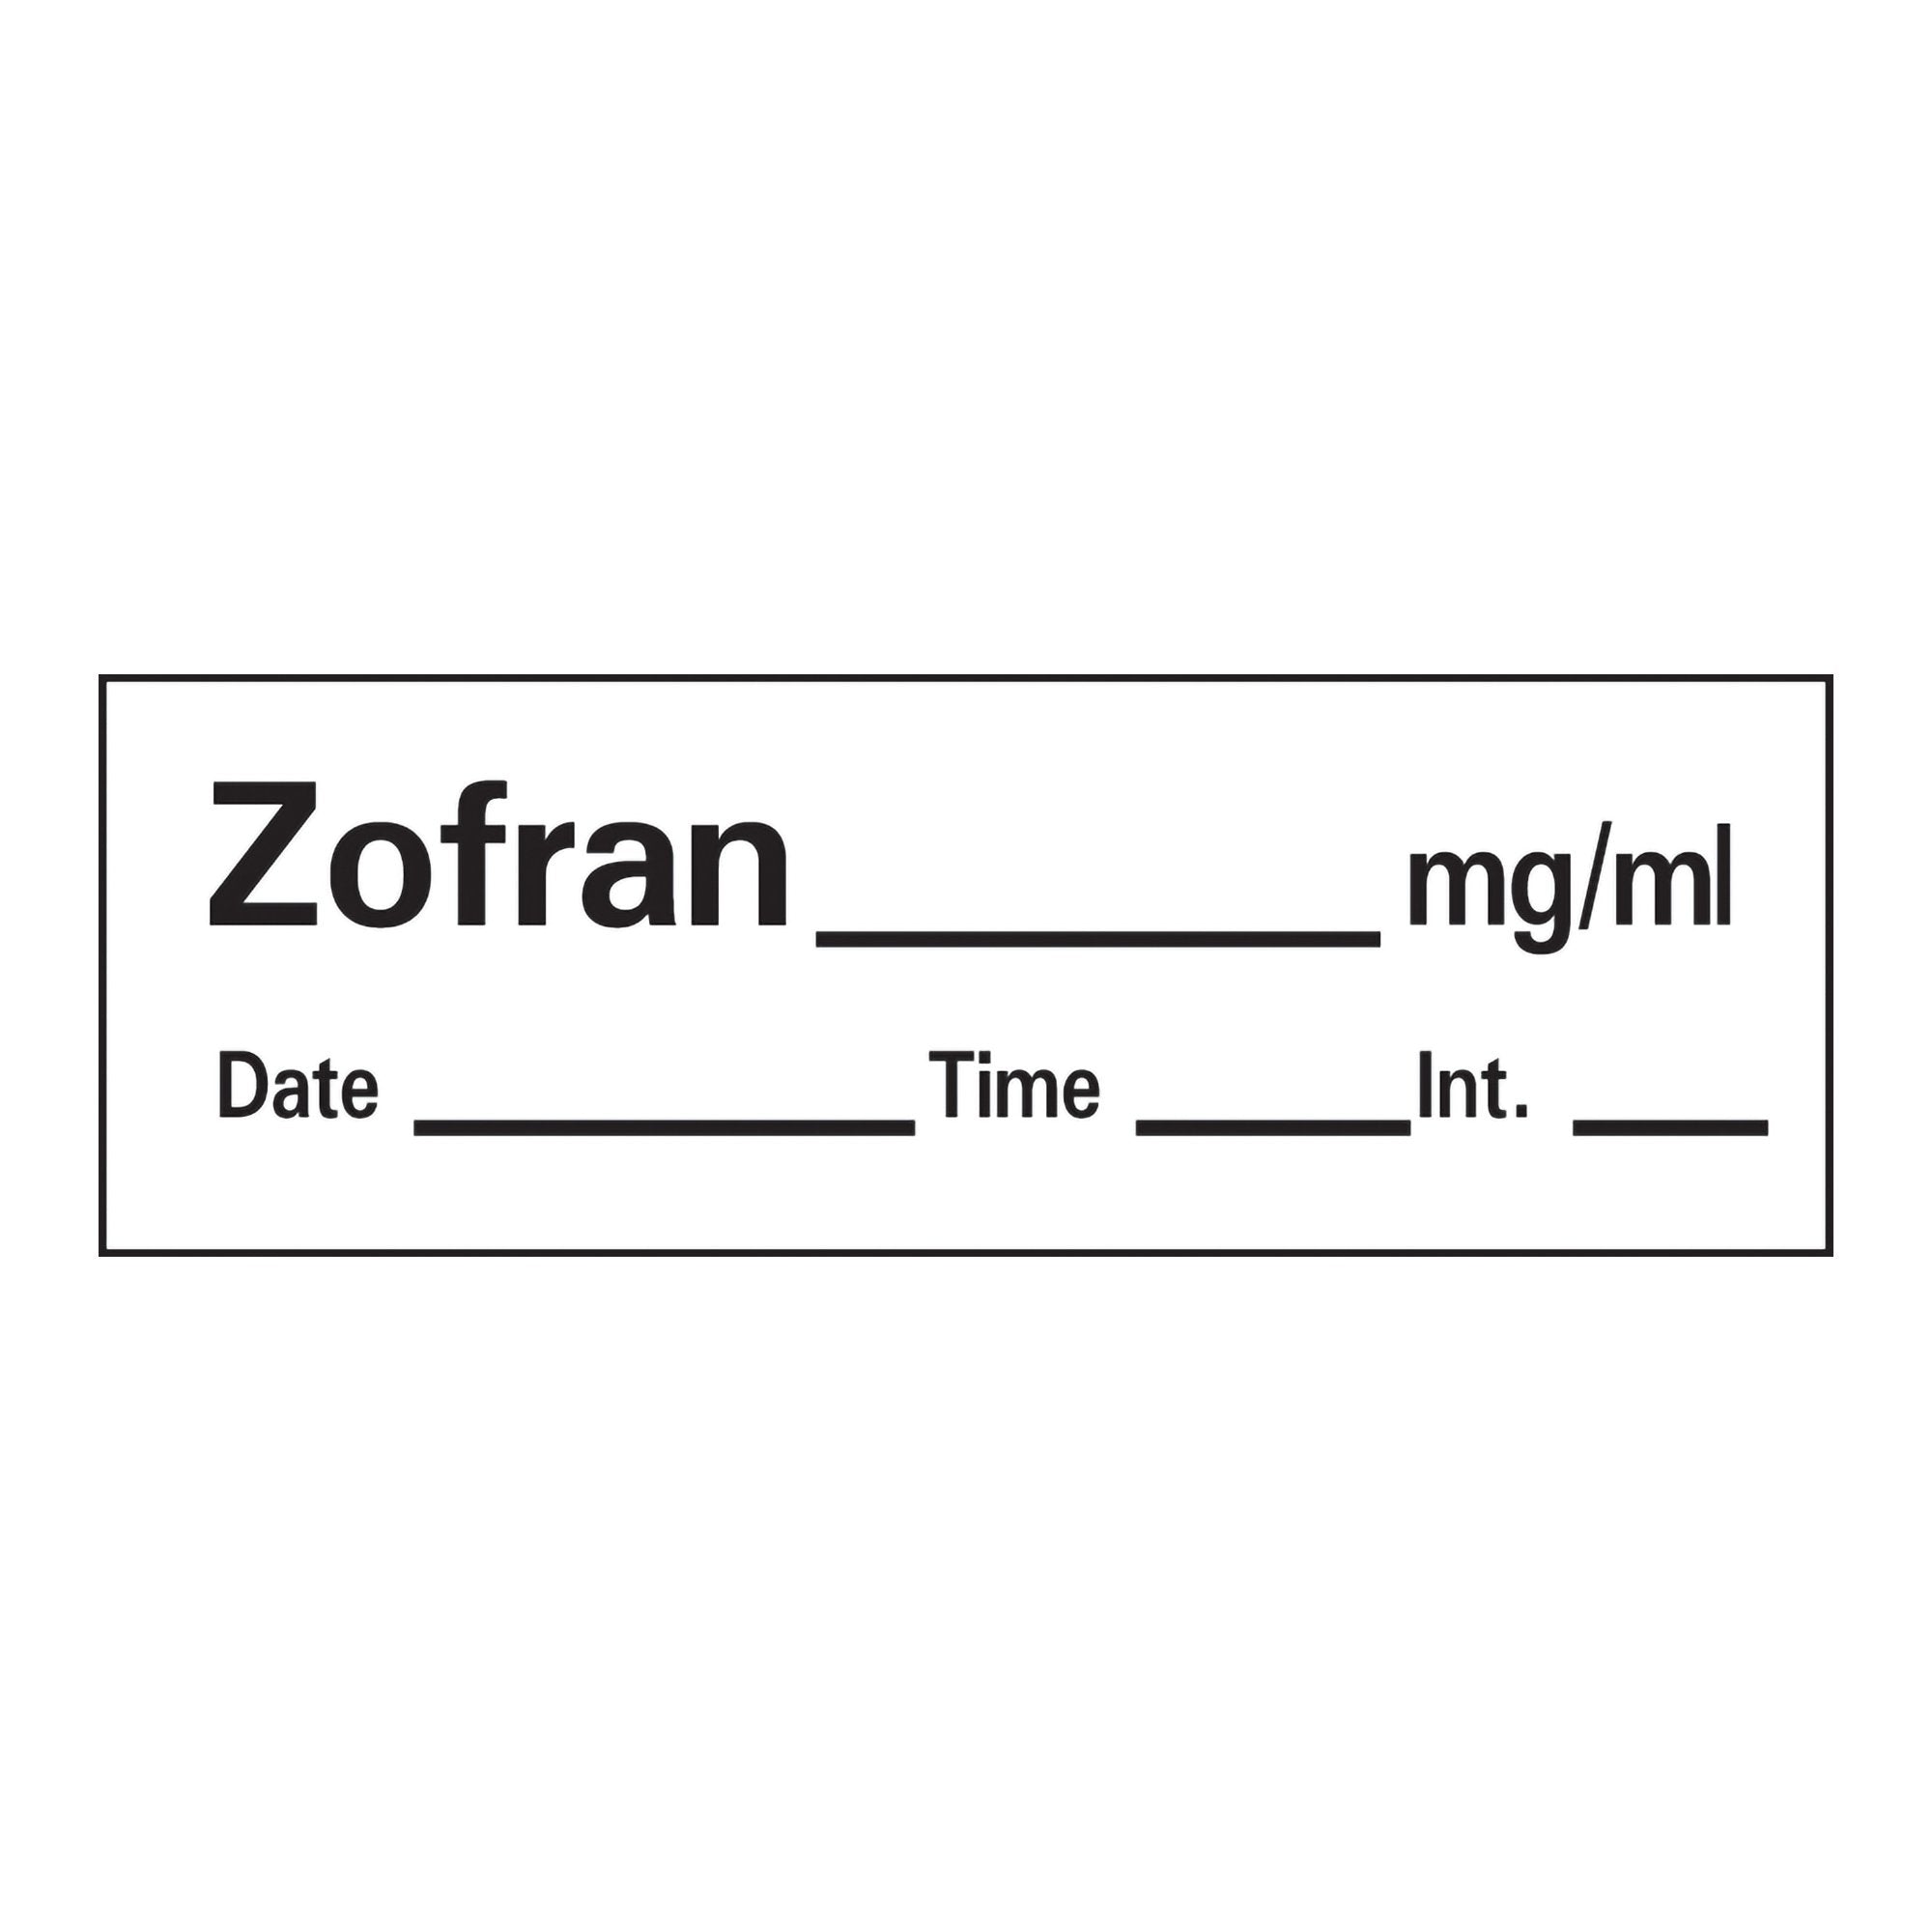 Drug Label Barkley® Anesthesia Label Tape Zofran_mg/mL Date_Time_Int_ White 1/2 X 1-1/2 Inch